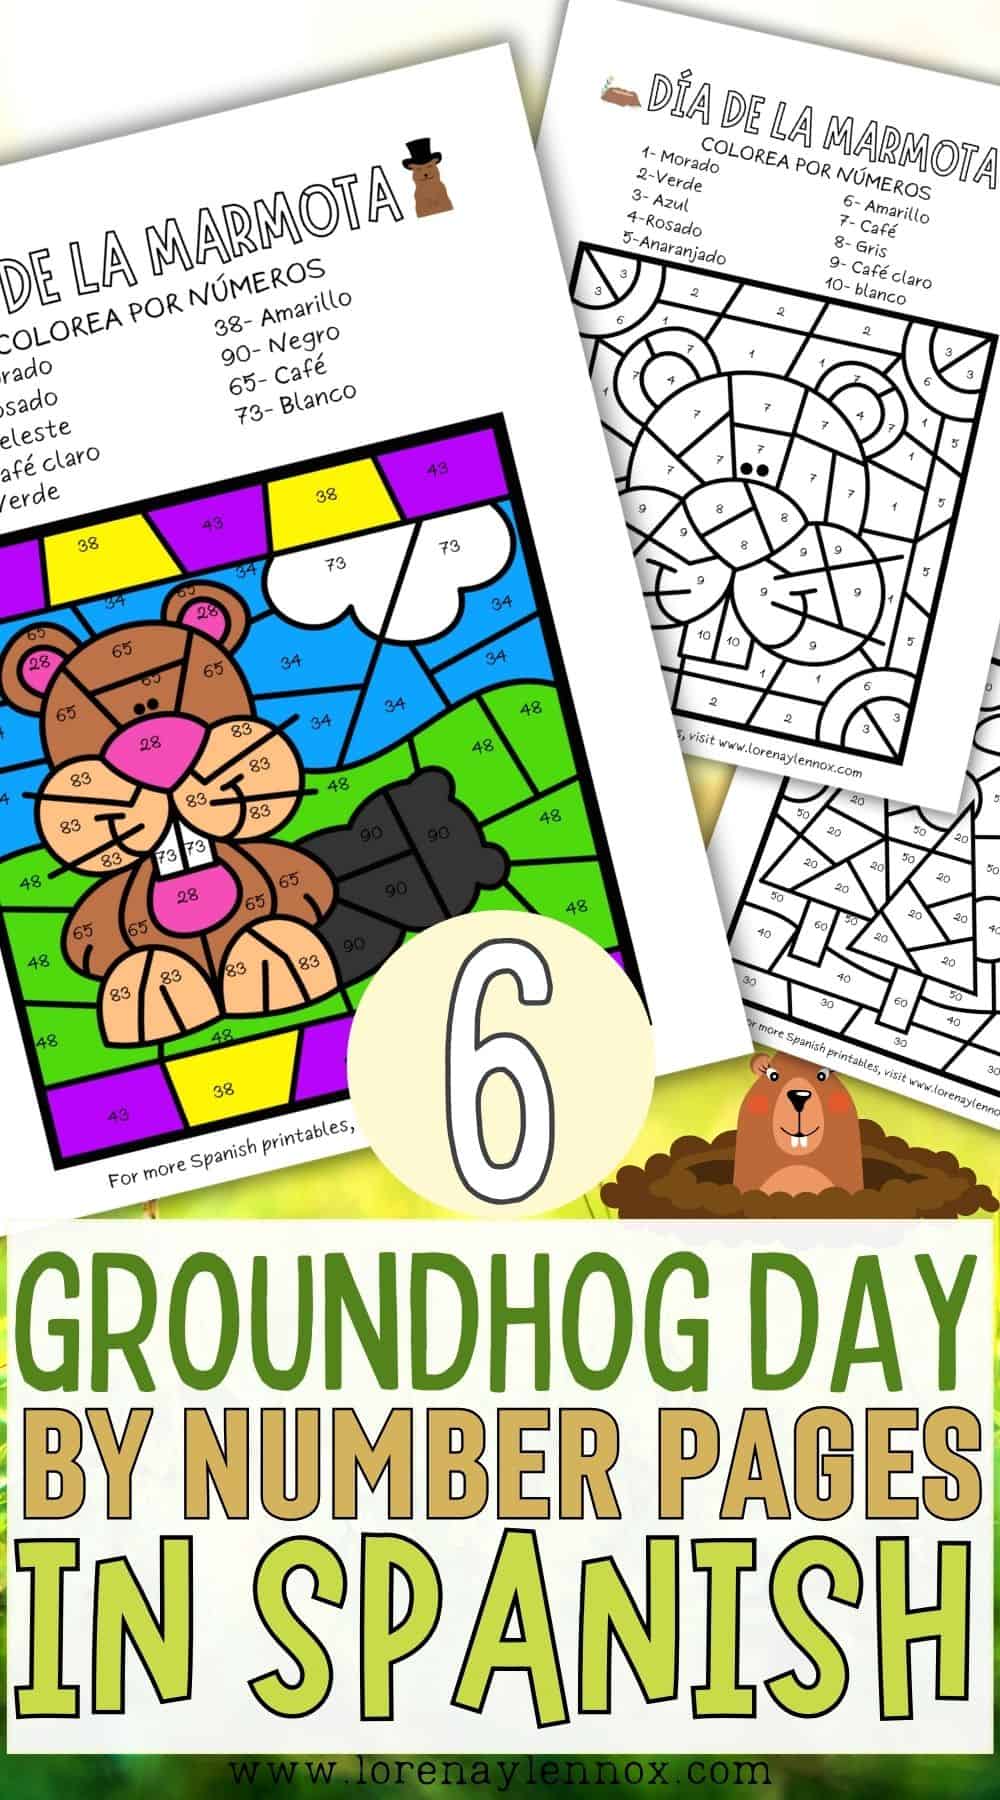 Dive into a bilingual learning experience with our engaging Groundhog Day Color by Number in Spanish activity! 🎨🔢 Uncover the world of numbers in Spanish while exploring the fascinating traditions of Groundhog Day. This delightful coloring adventure not only enhances language skills but also provides insights into the cultural celebration of el Día de la Marmota. Make learning colorful and fun for kids! 🌈 #SpanishLearning #GroundhogDay #BilingualEducation